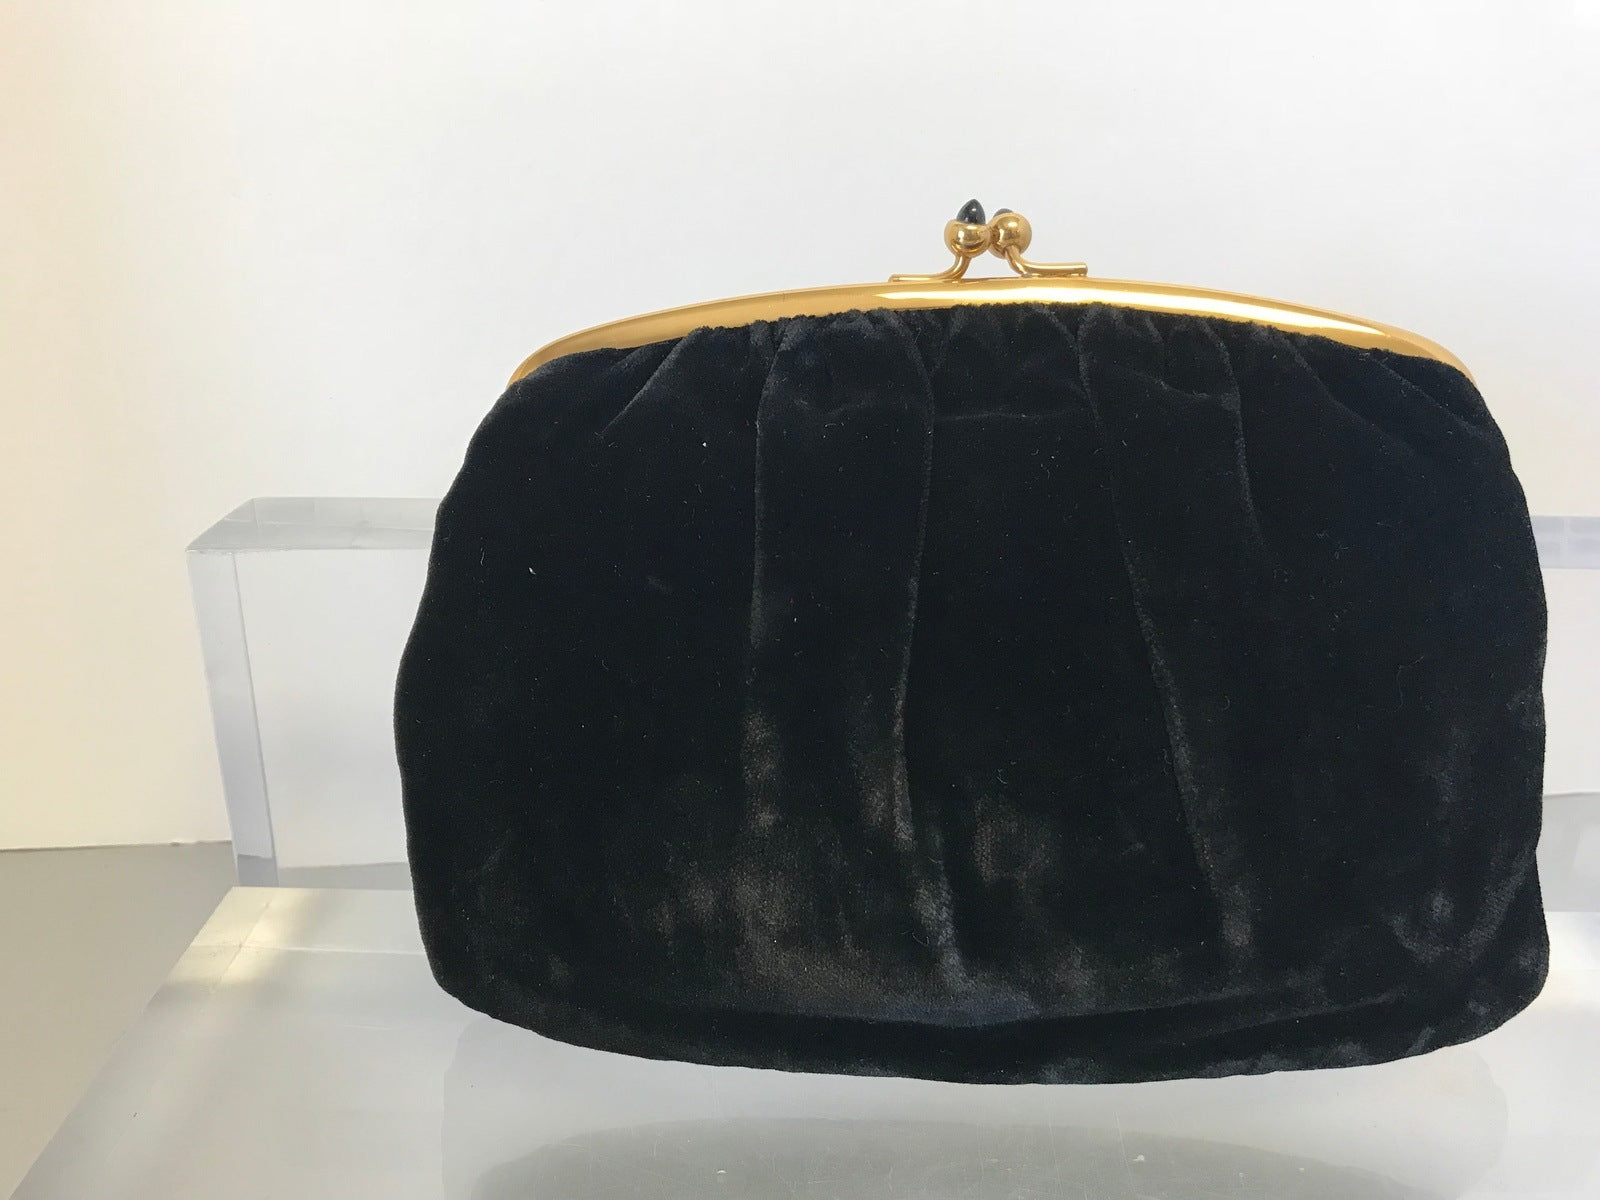 Clutch purse | Collections Online - Museum of New Zealand Te Papa Tongarewa